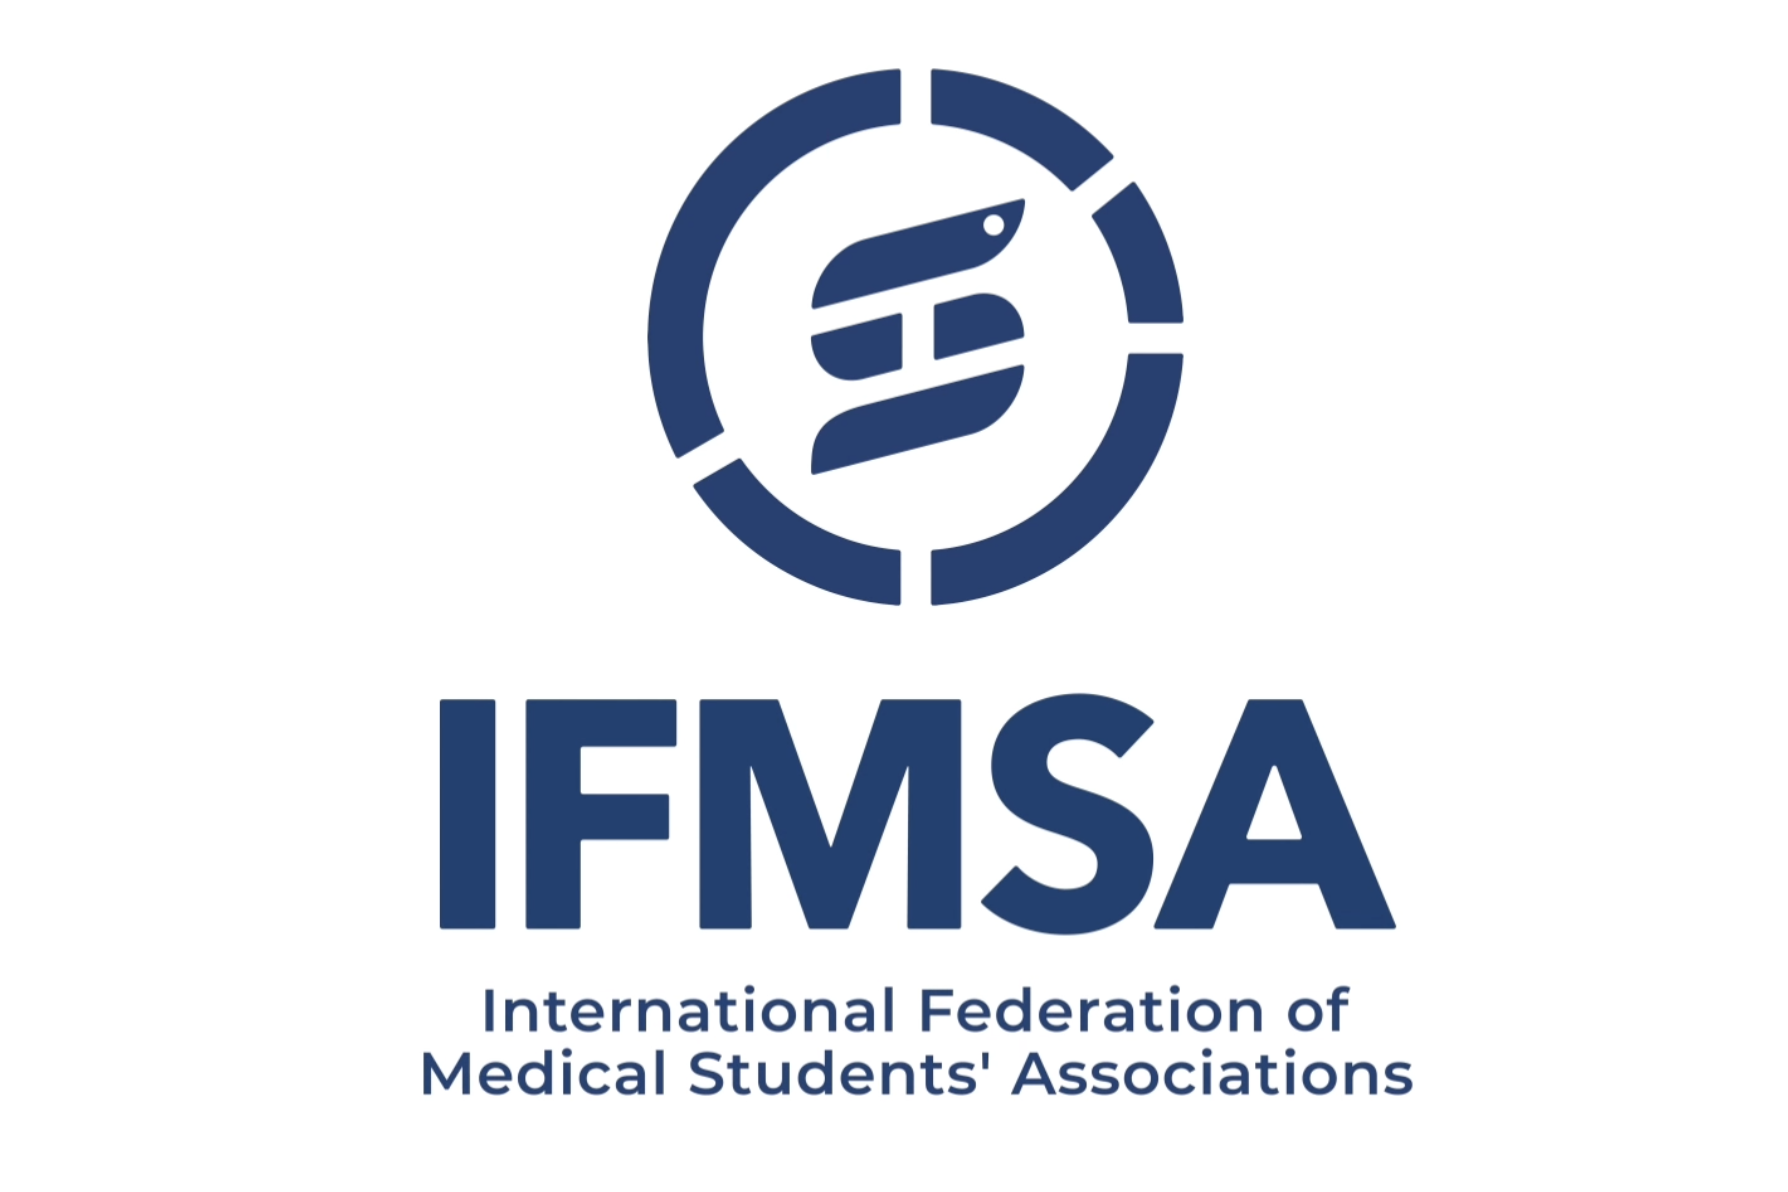 The International Federation of Medical Students' Associations